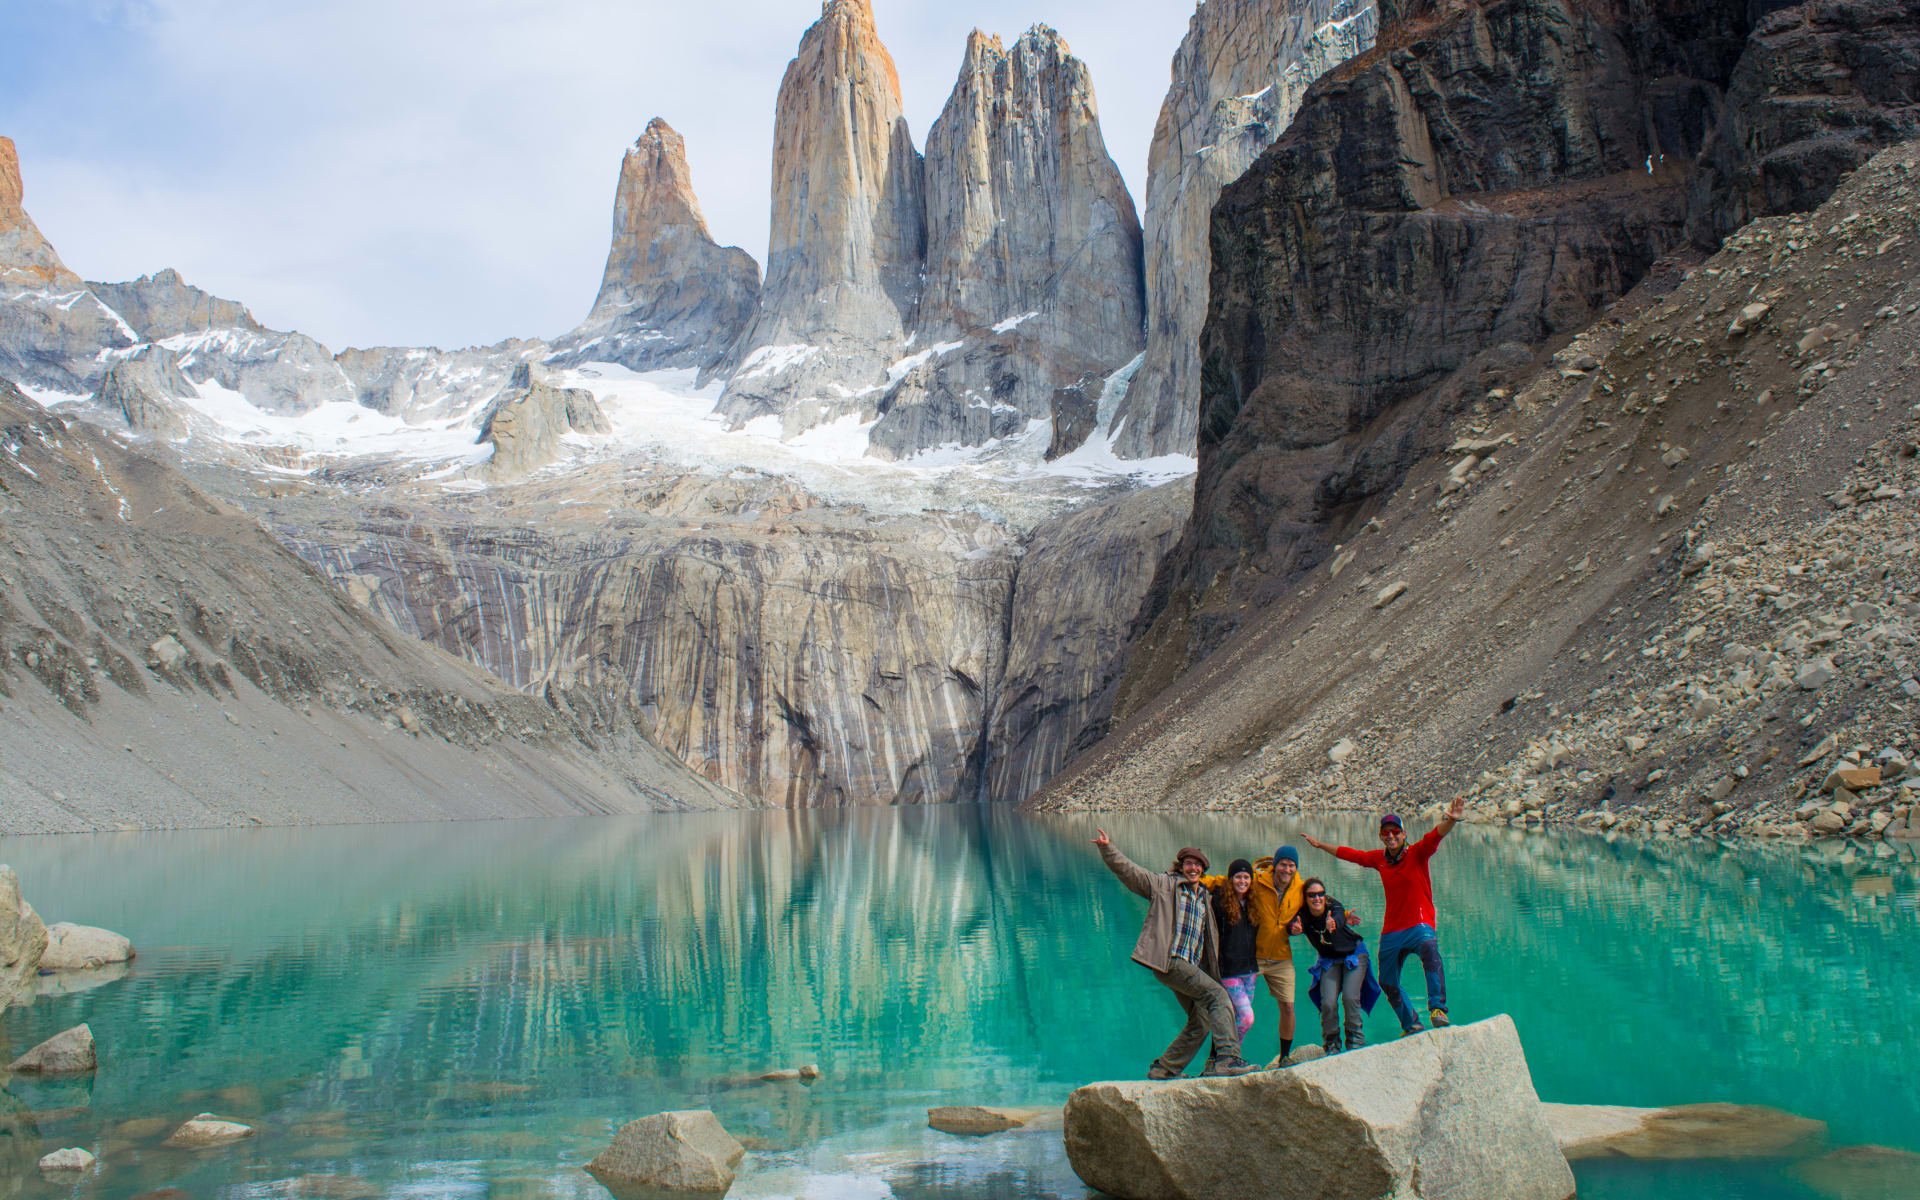 A group of people are standing in front of a turquoise lake with snow-capped mountains in the background. 